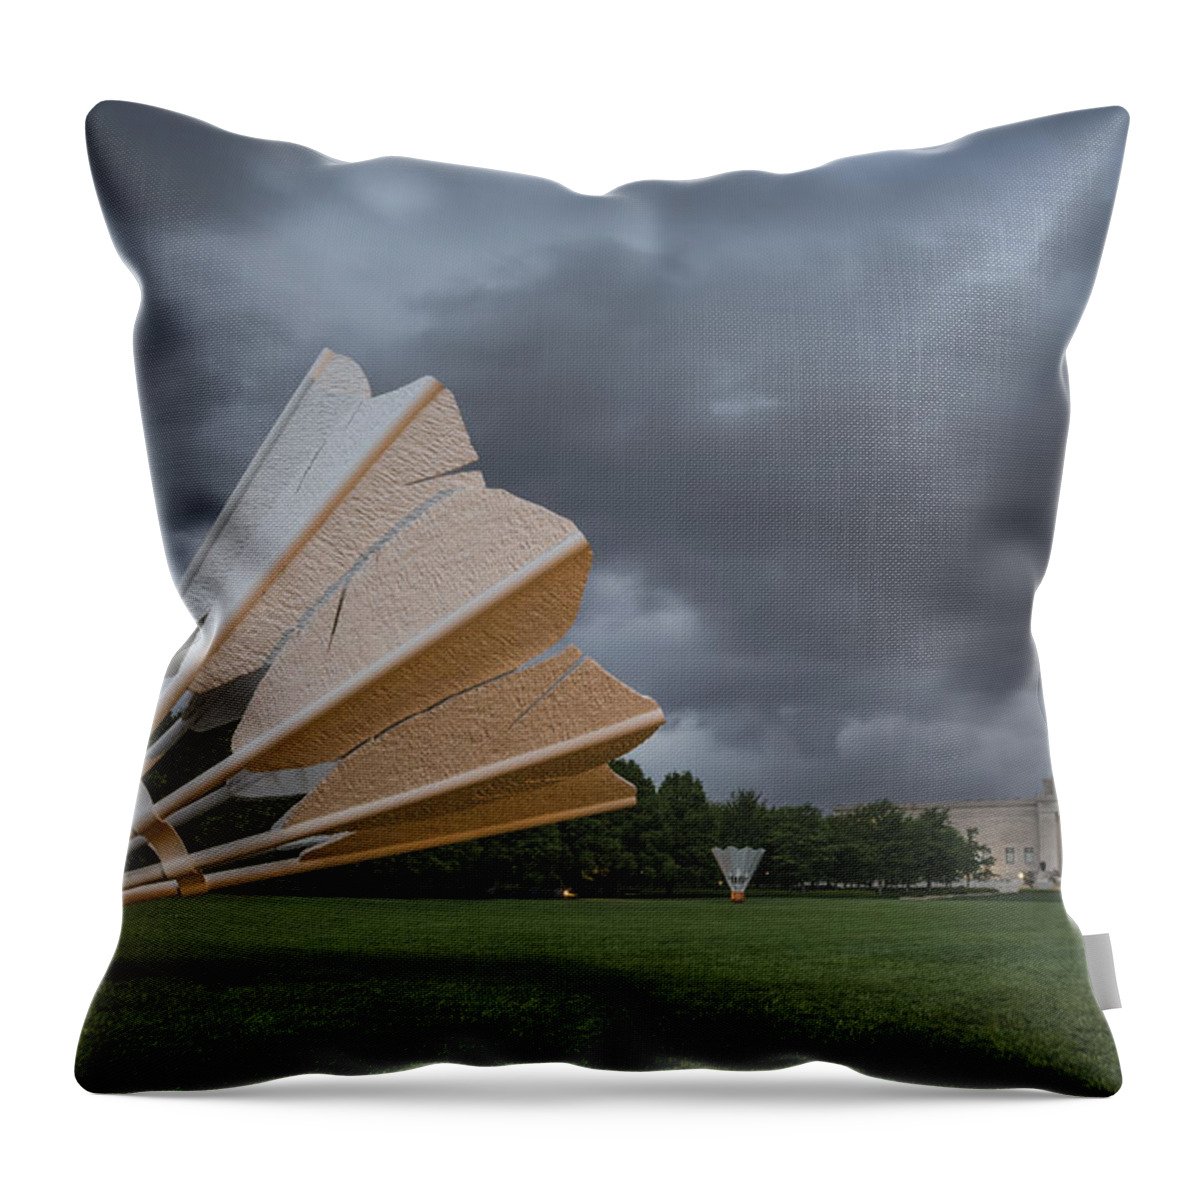 Kansas City Throw Pillow featuring the photograph The Lawn by Ryan Heffron